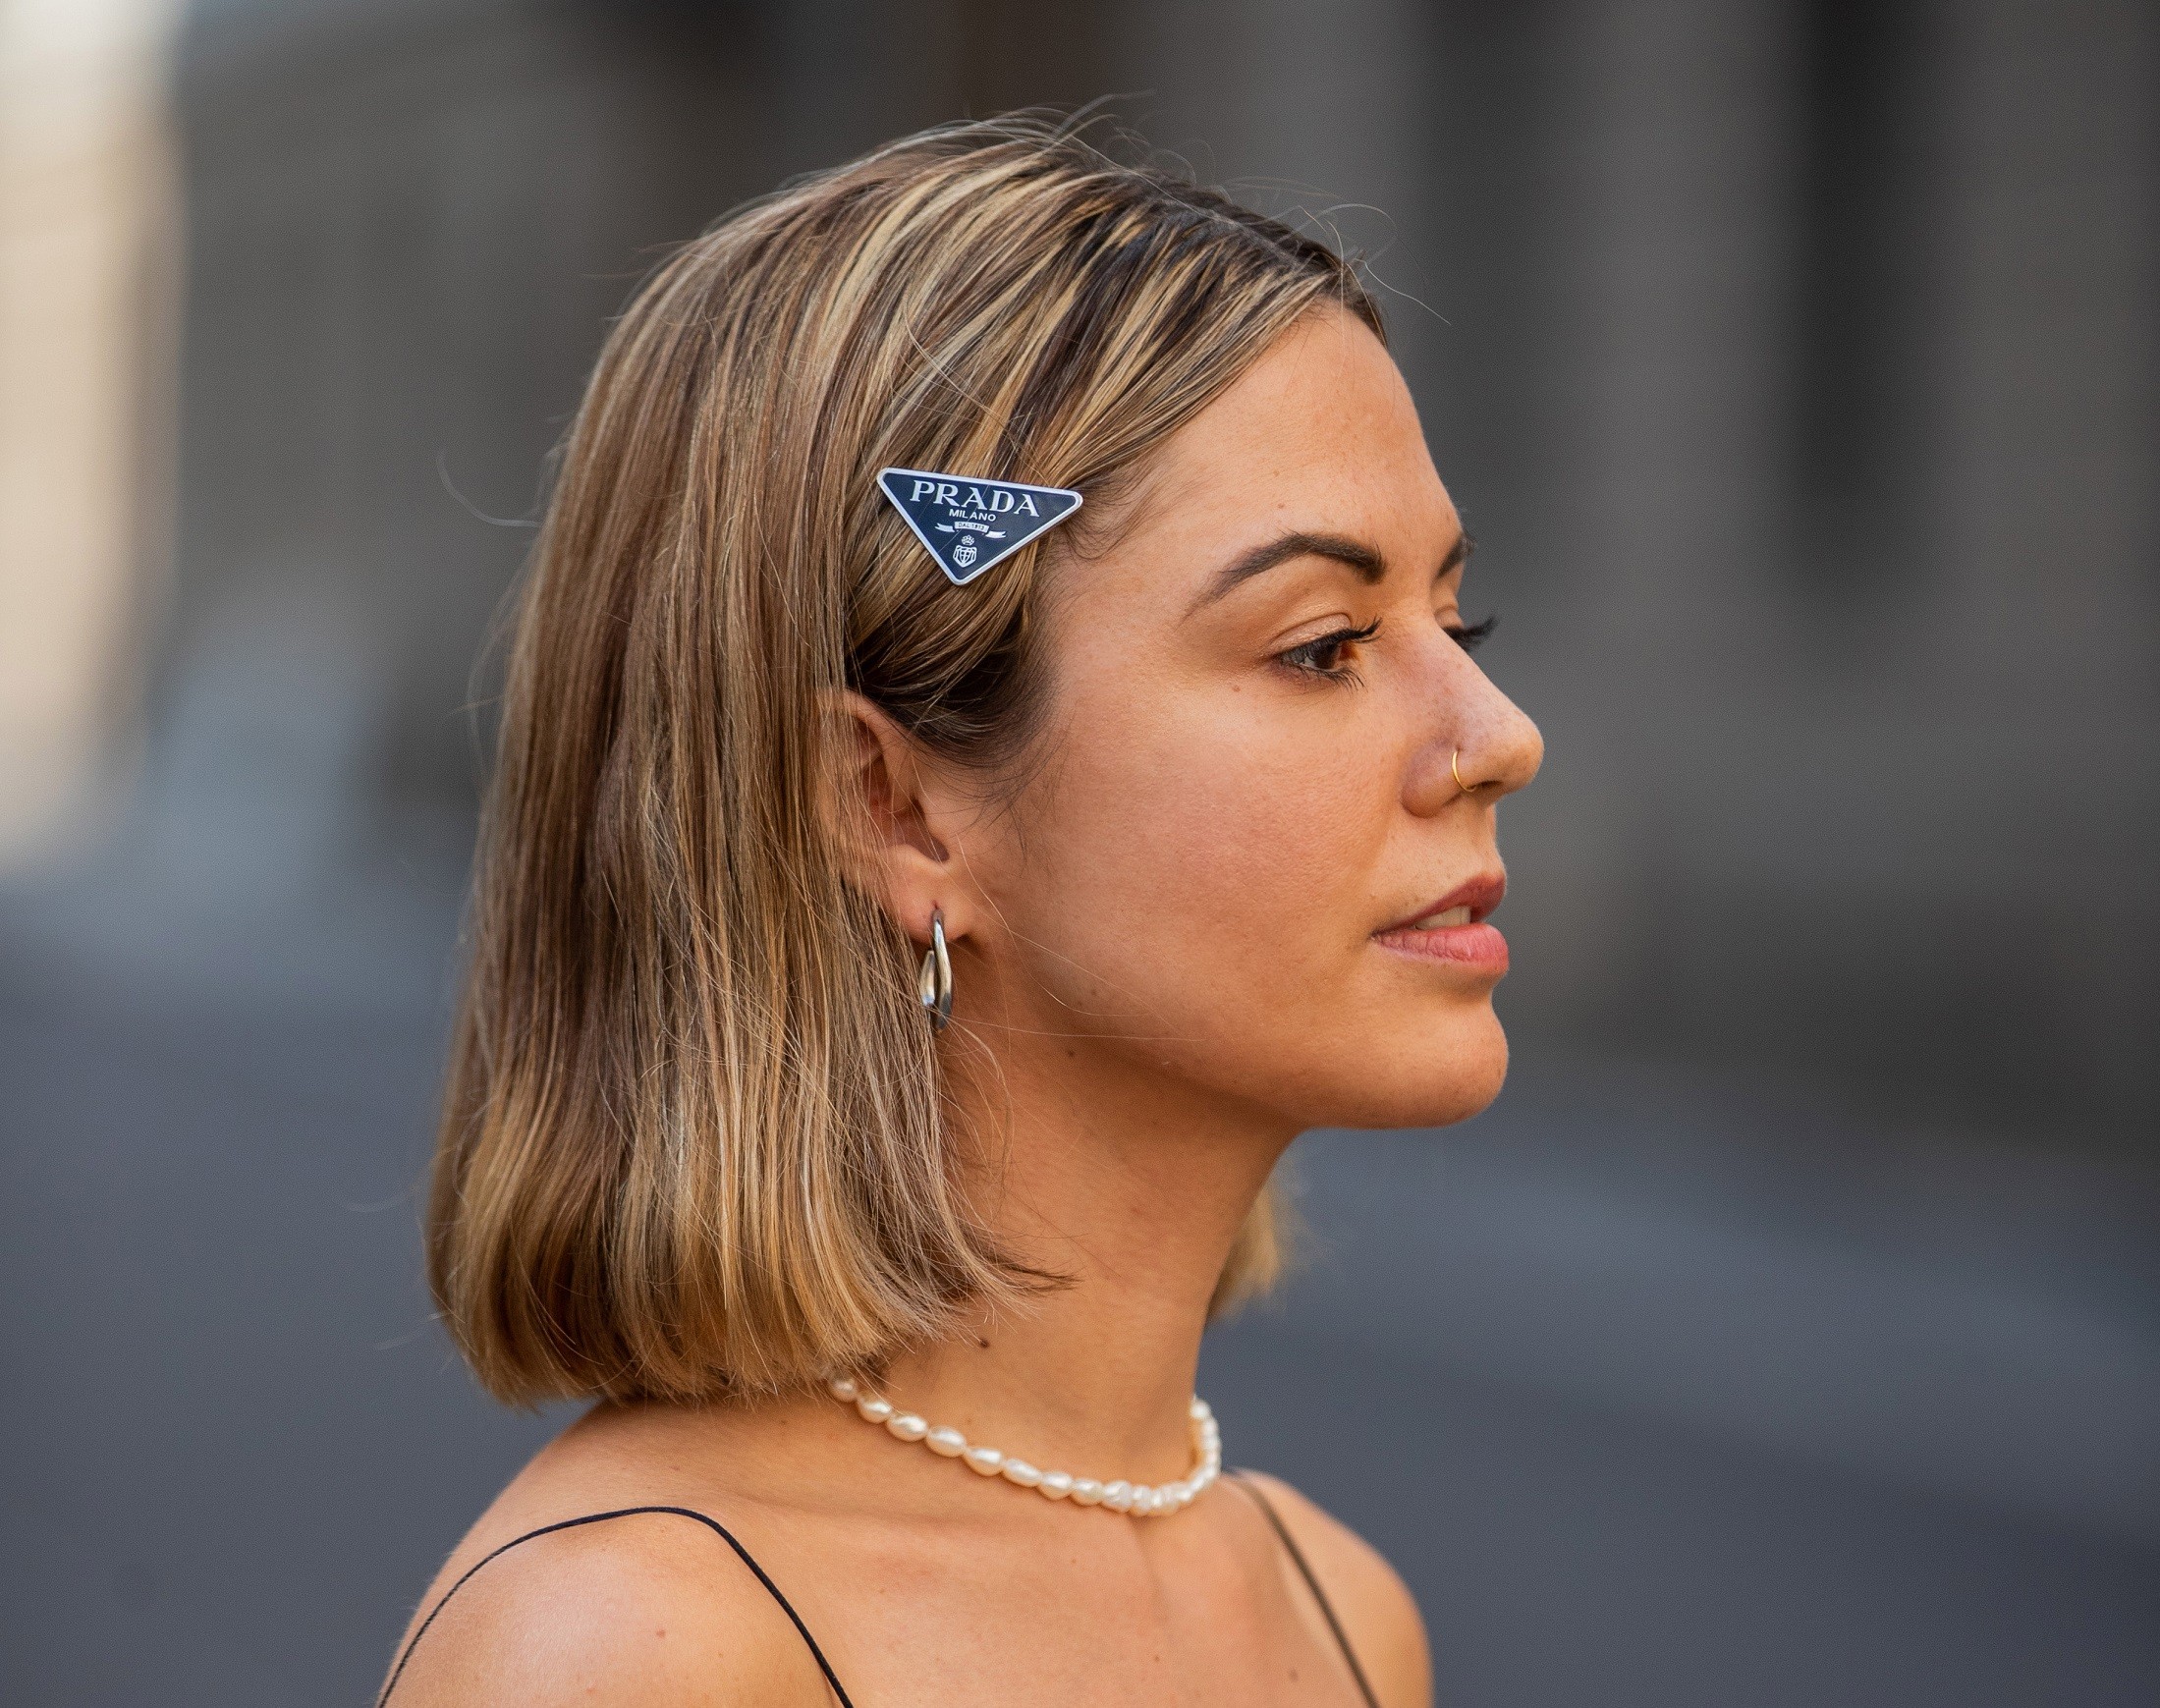 Minimalist hair accessories that perfectly complement your look